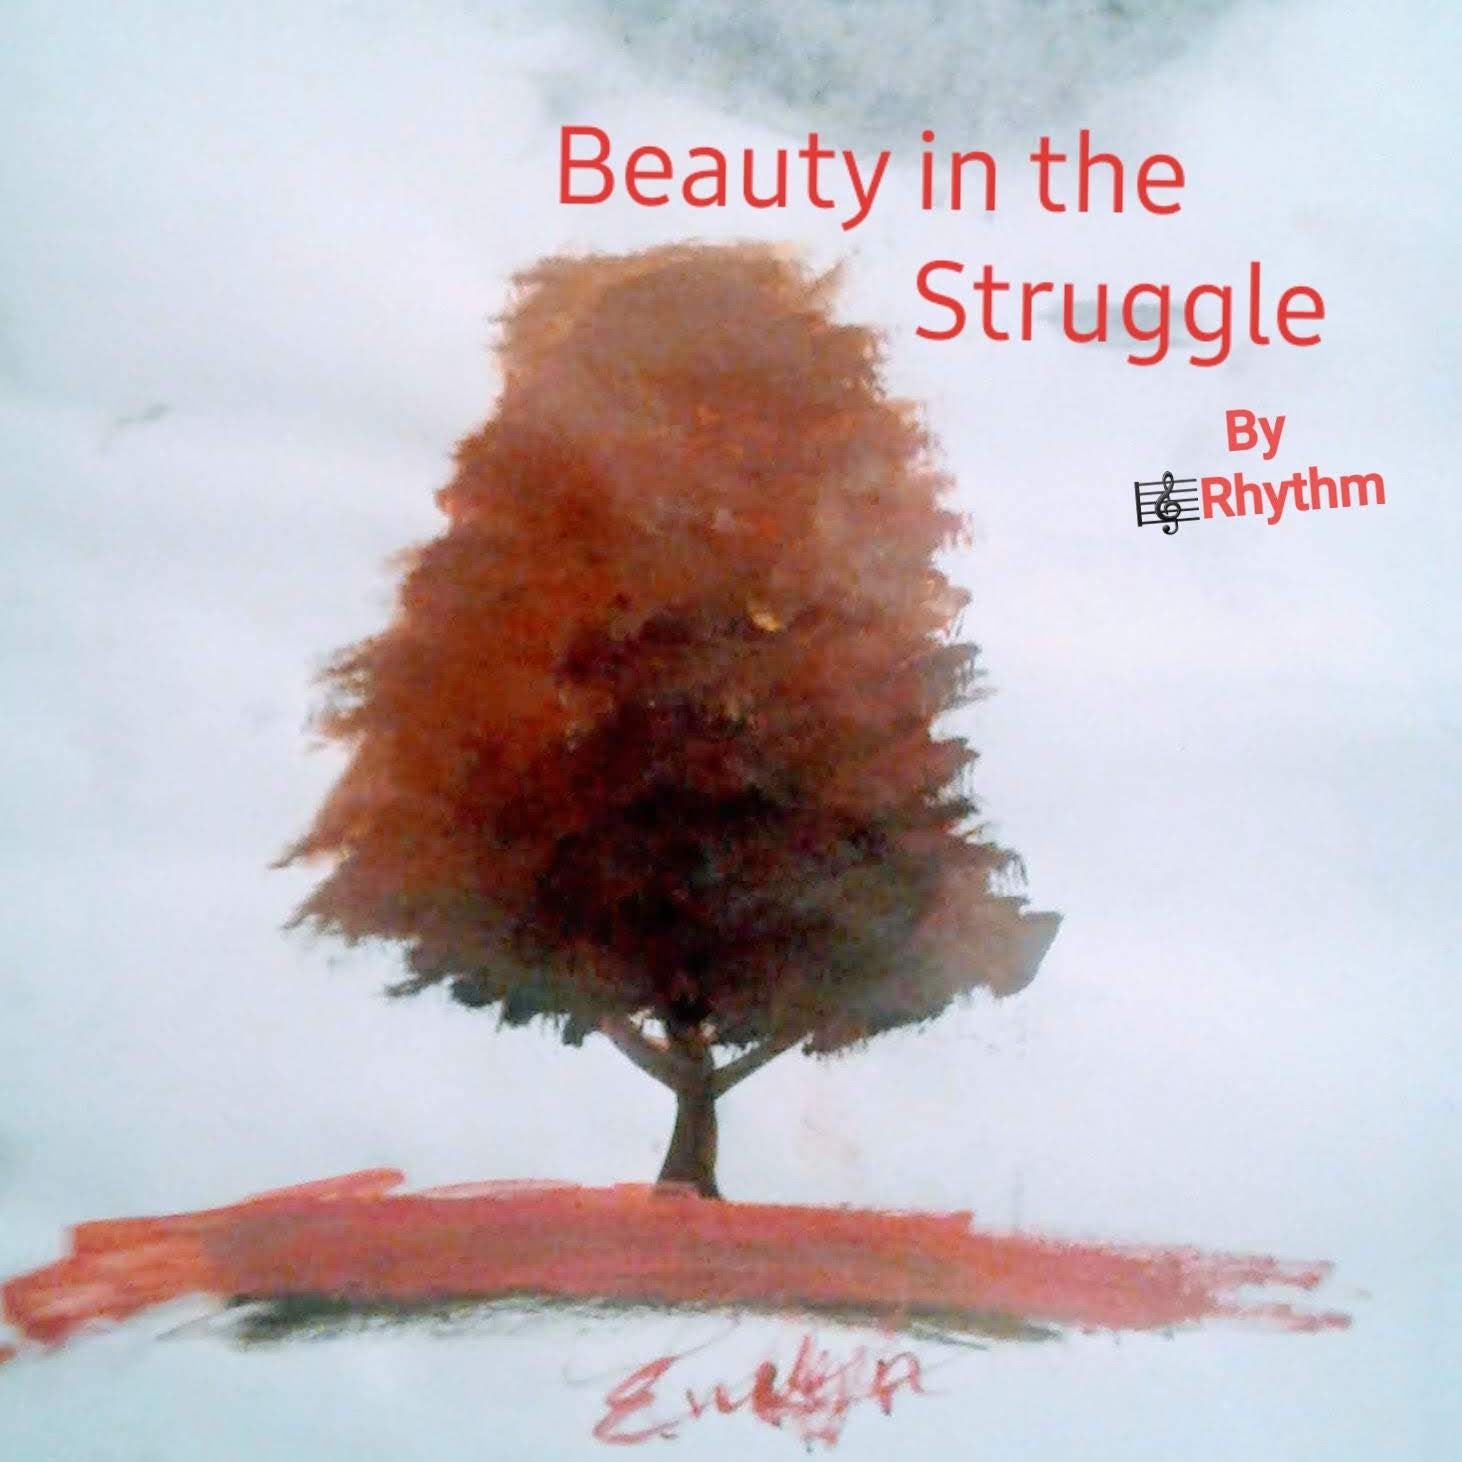 Rhythm sets out to conquer his dreams with debut album “Beauty in The Struggle” (SwanoDown Report)